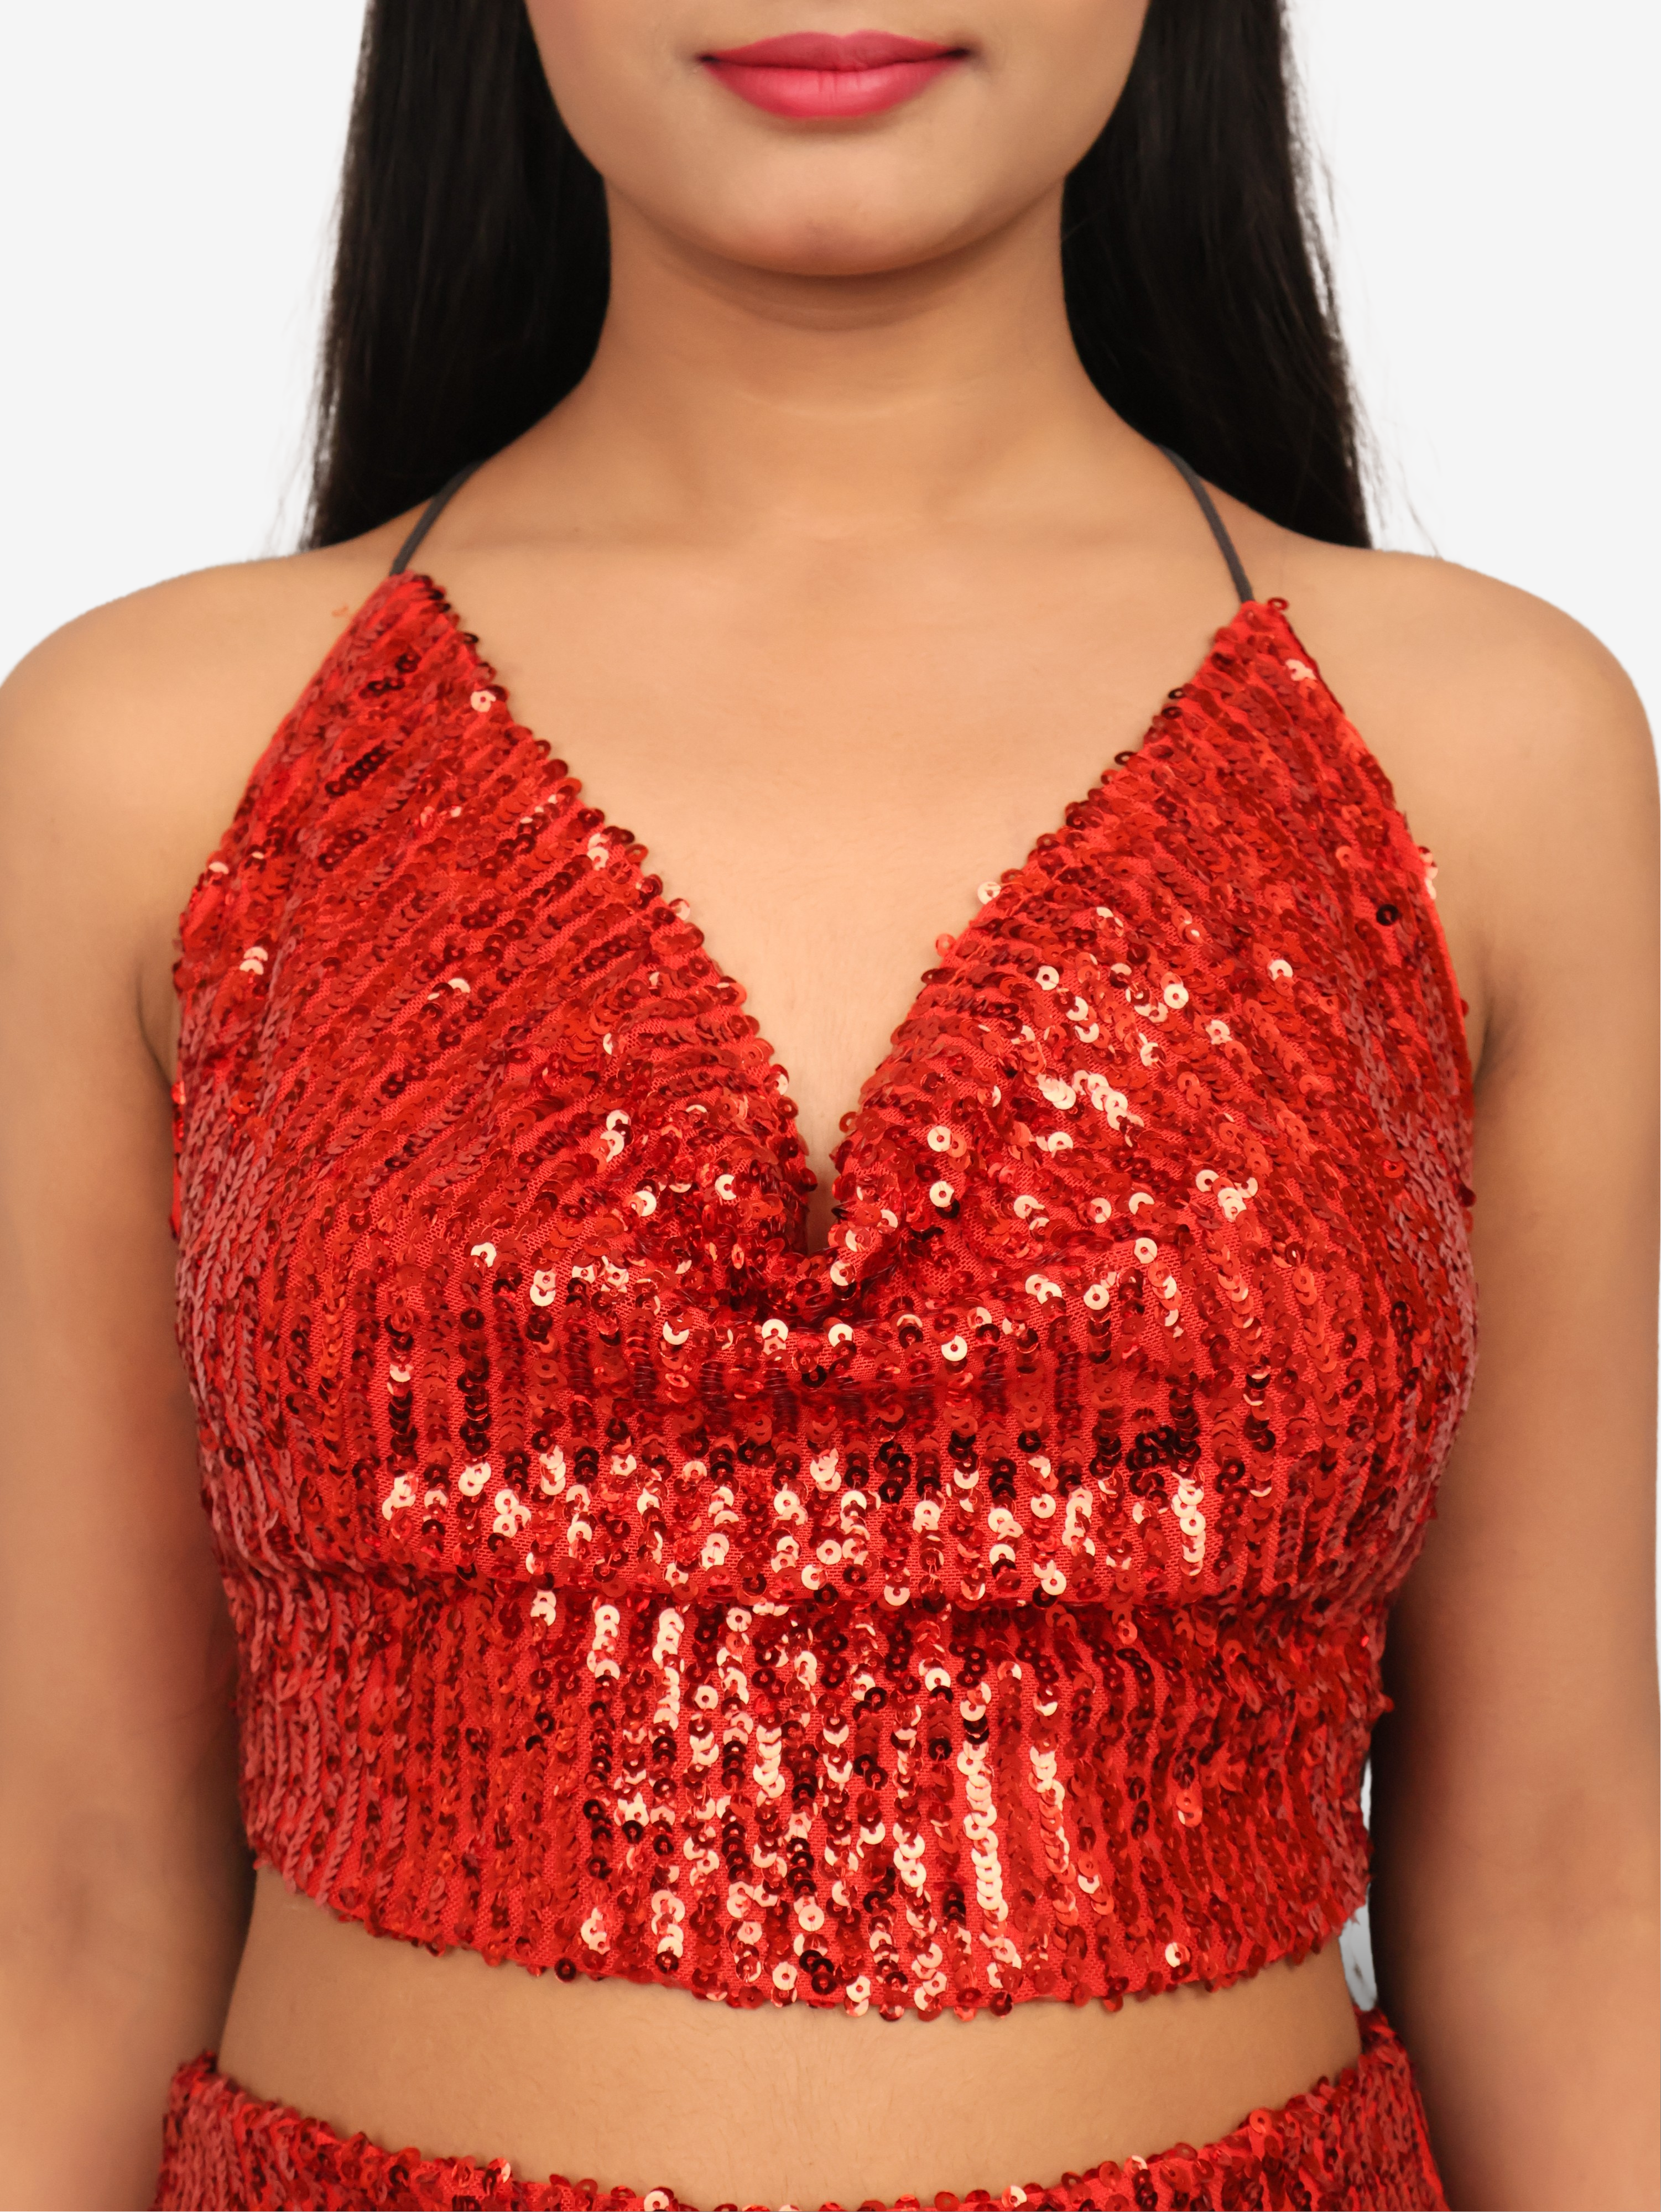 Sequins Spaghetti Neck Co-Ord Set by Shreekama Red Dress for Party Festival Wedding Occasion in Noida